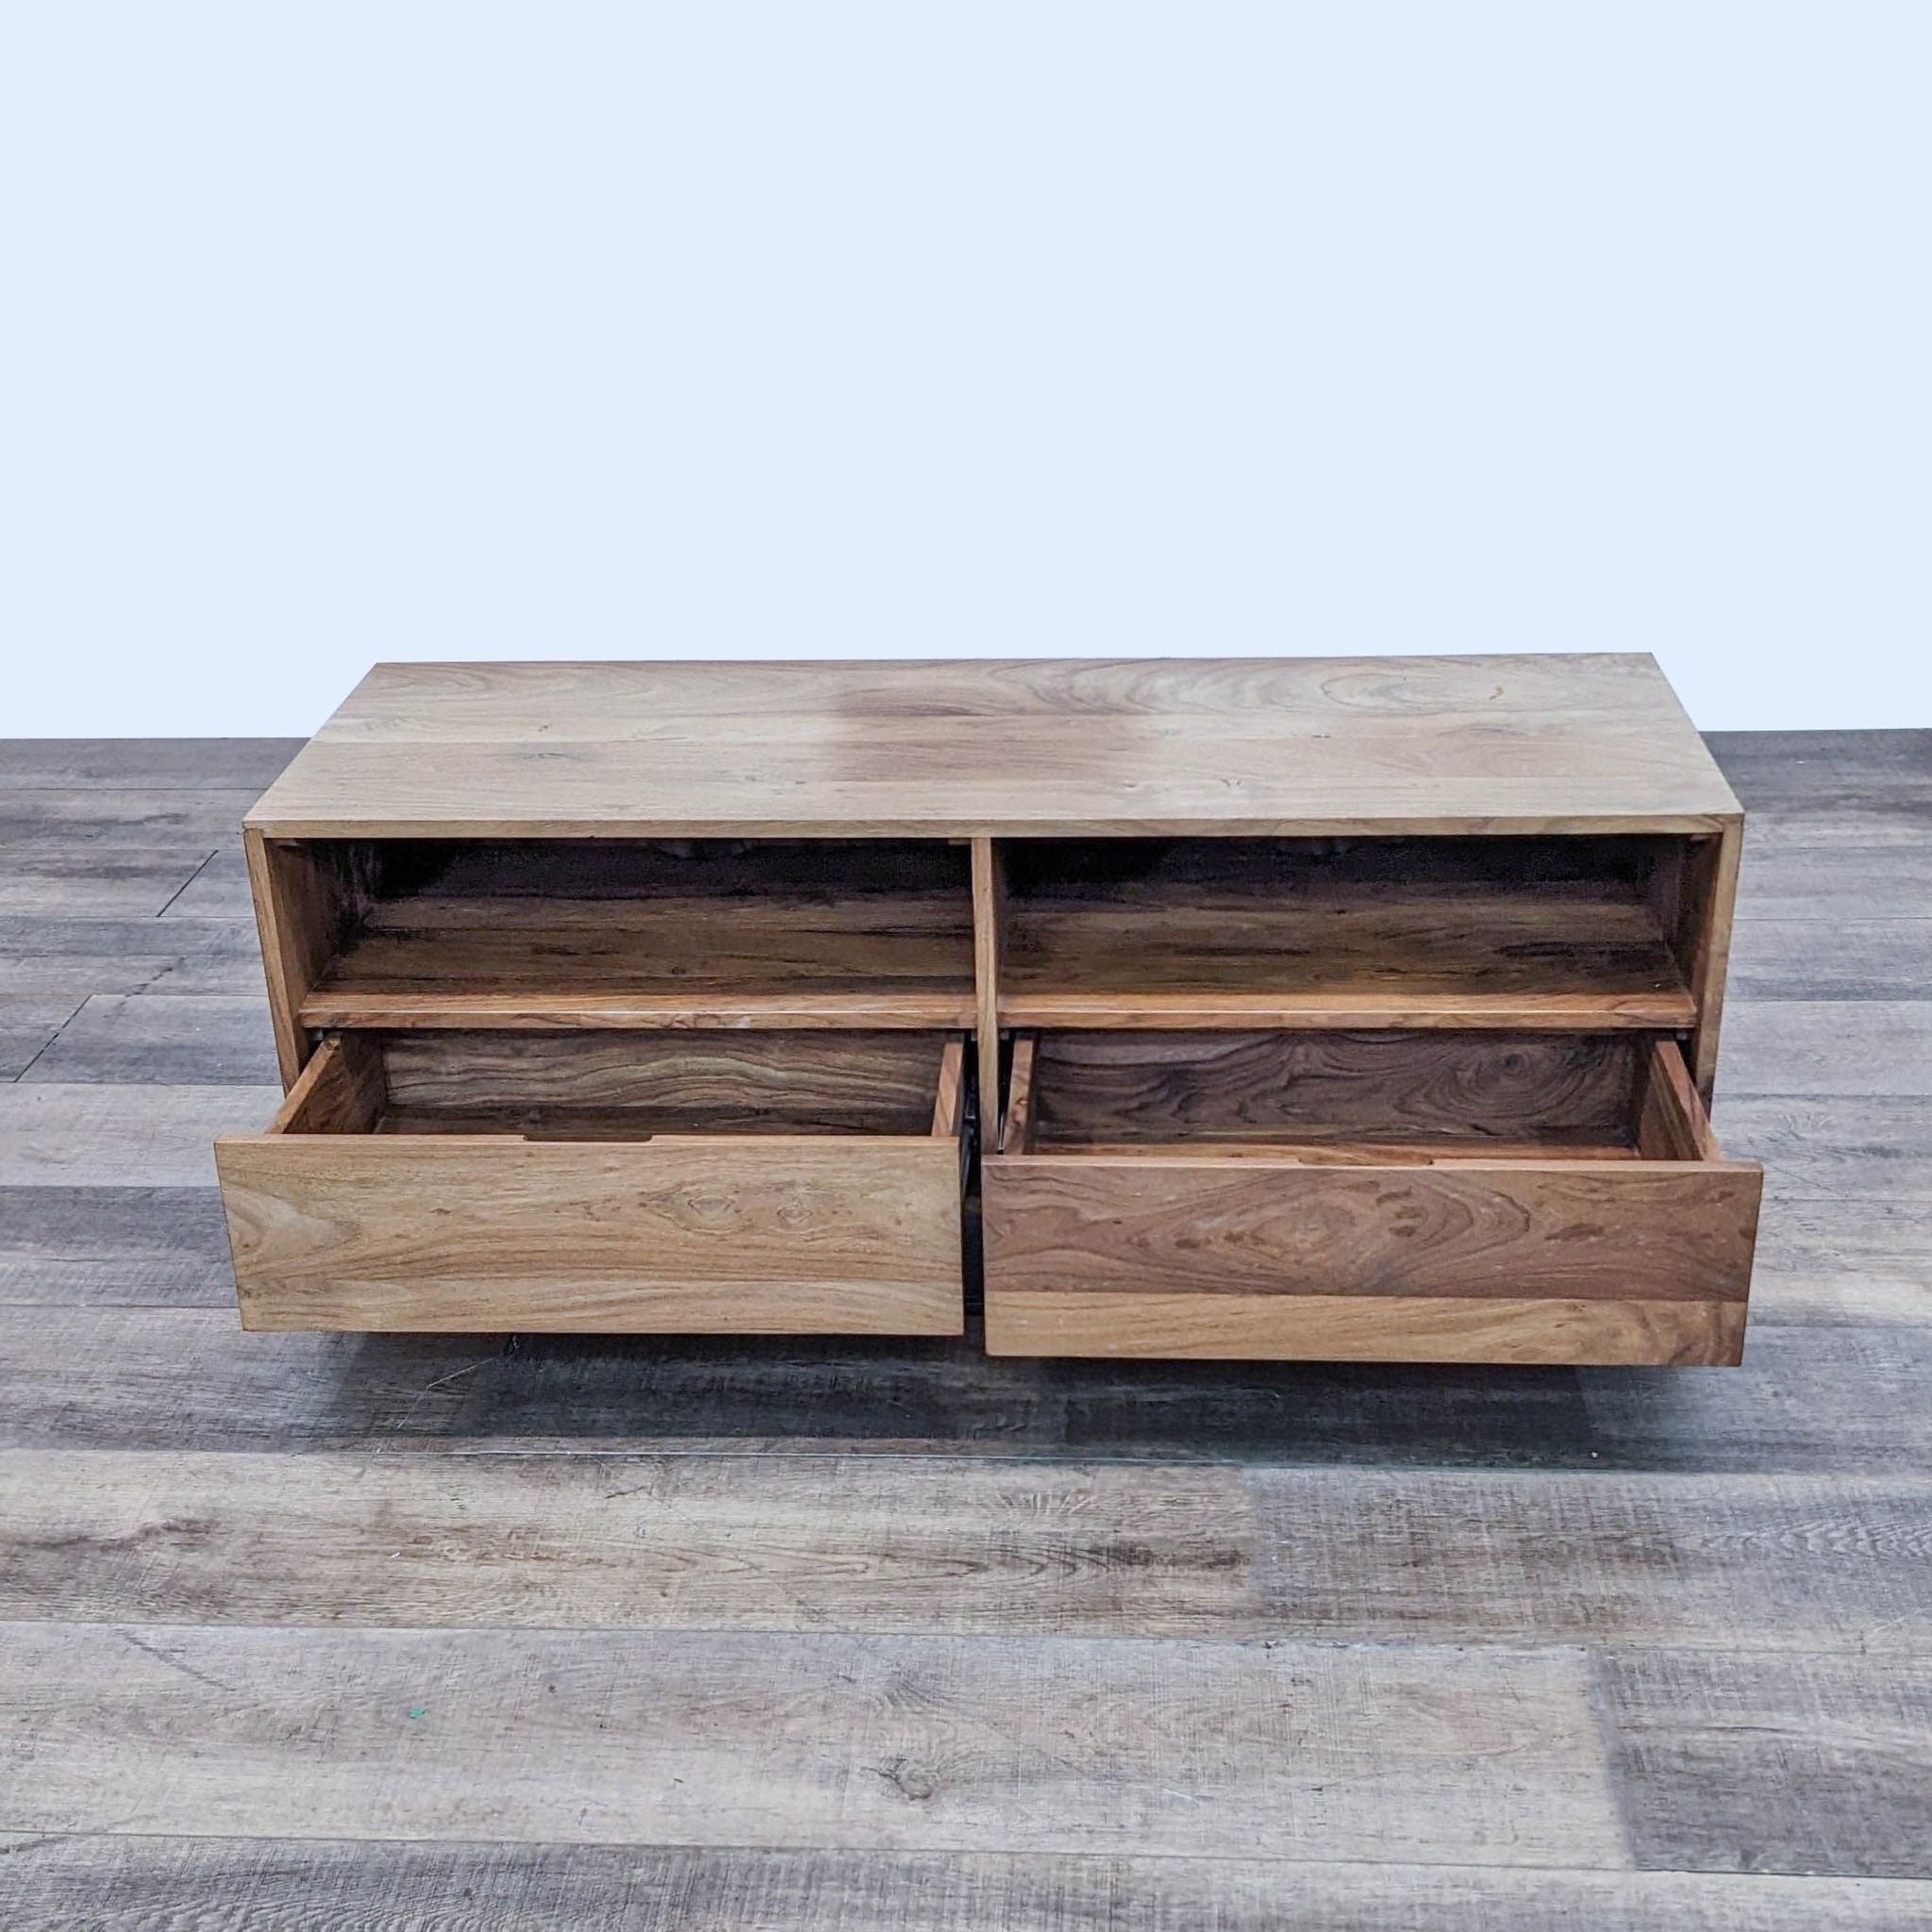 Wooden Reperch brand entertainment center with open compartments, featuring one drawer out, on a grey wood grain floor.